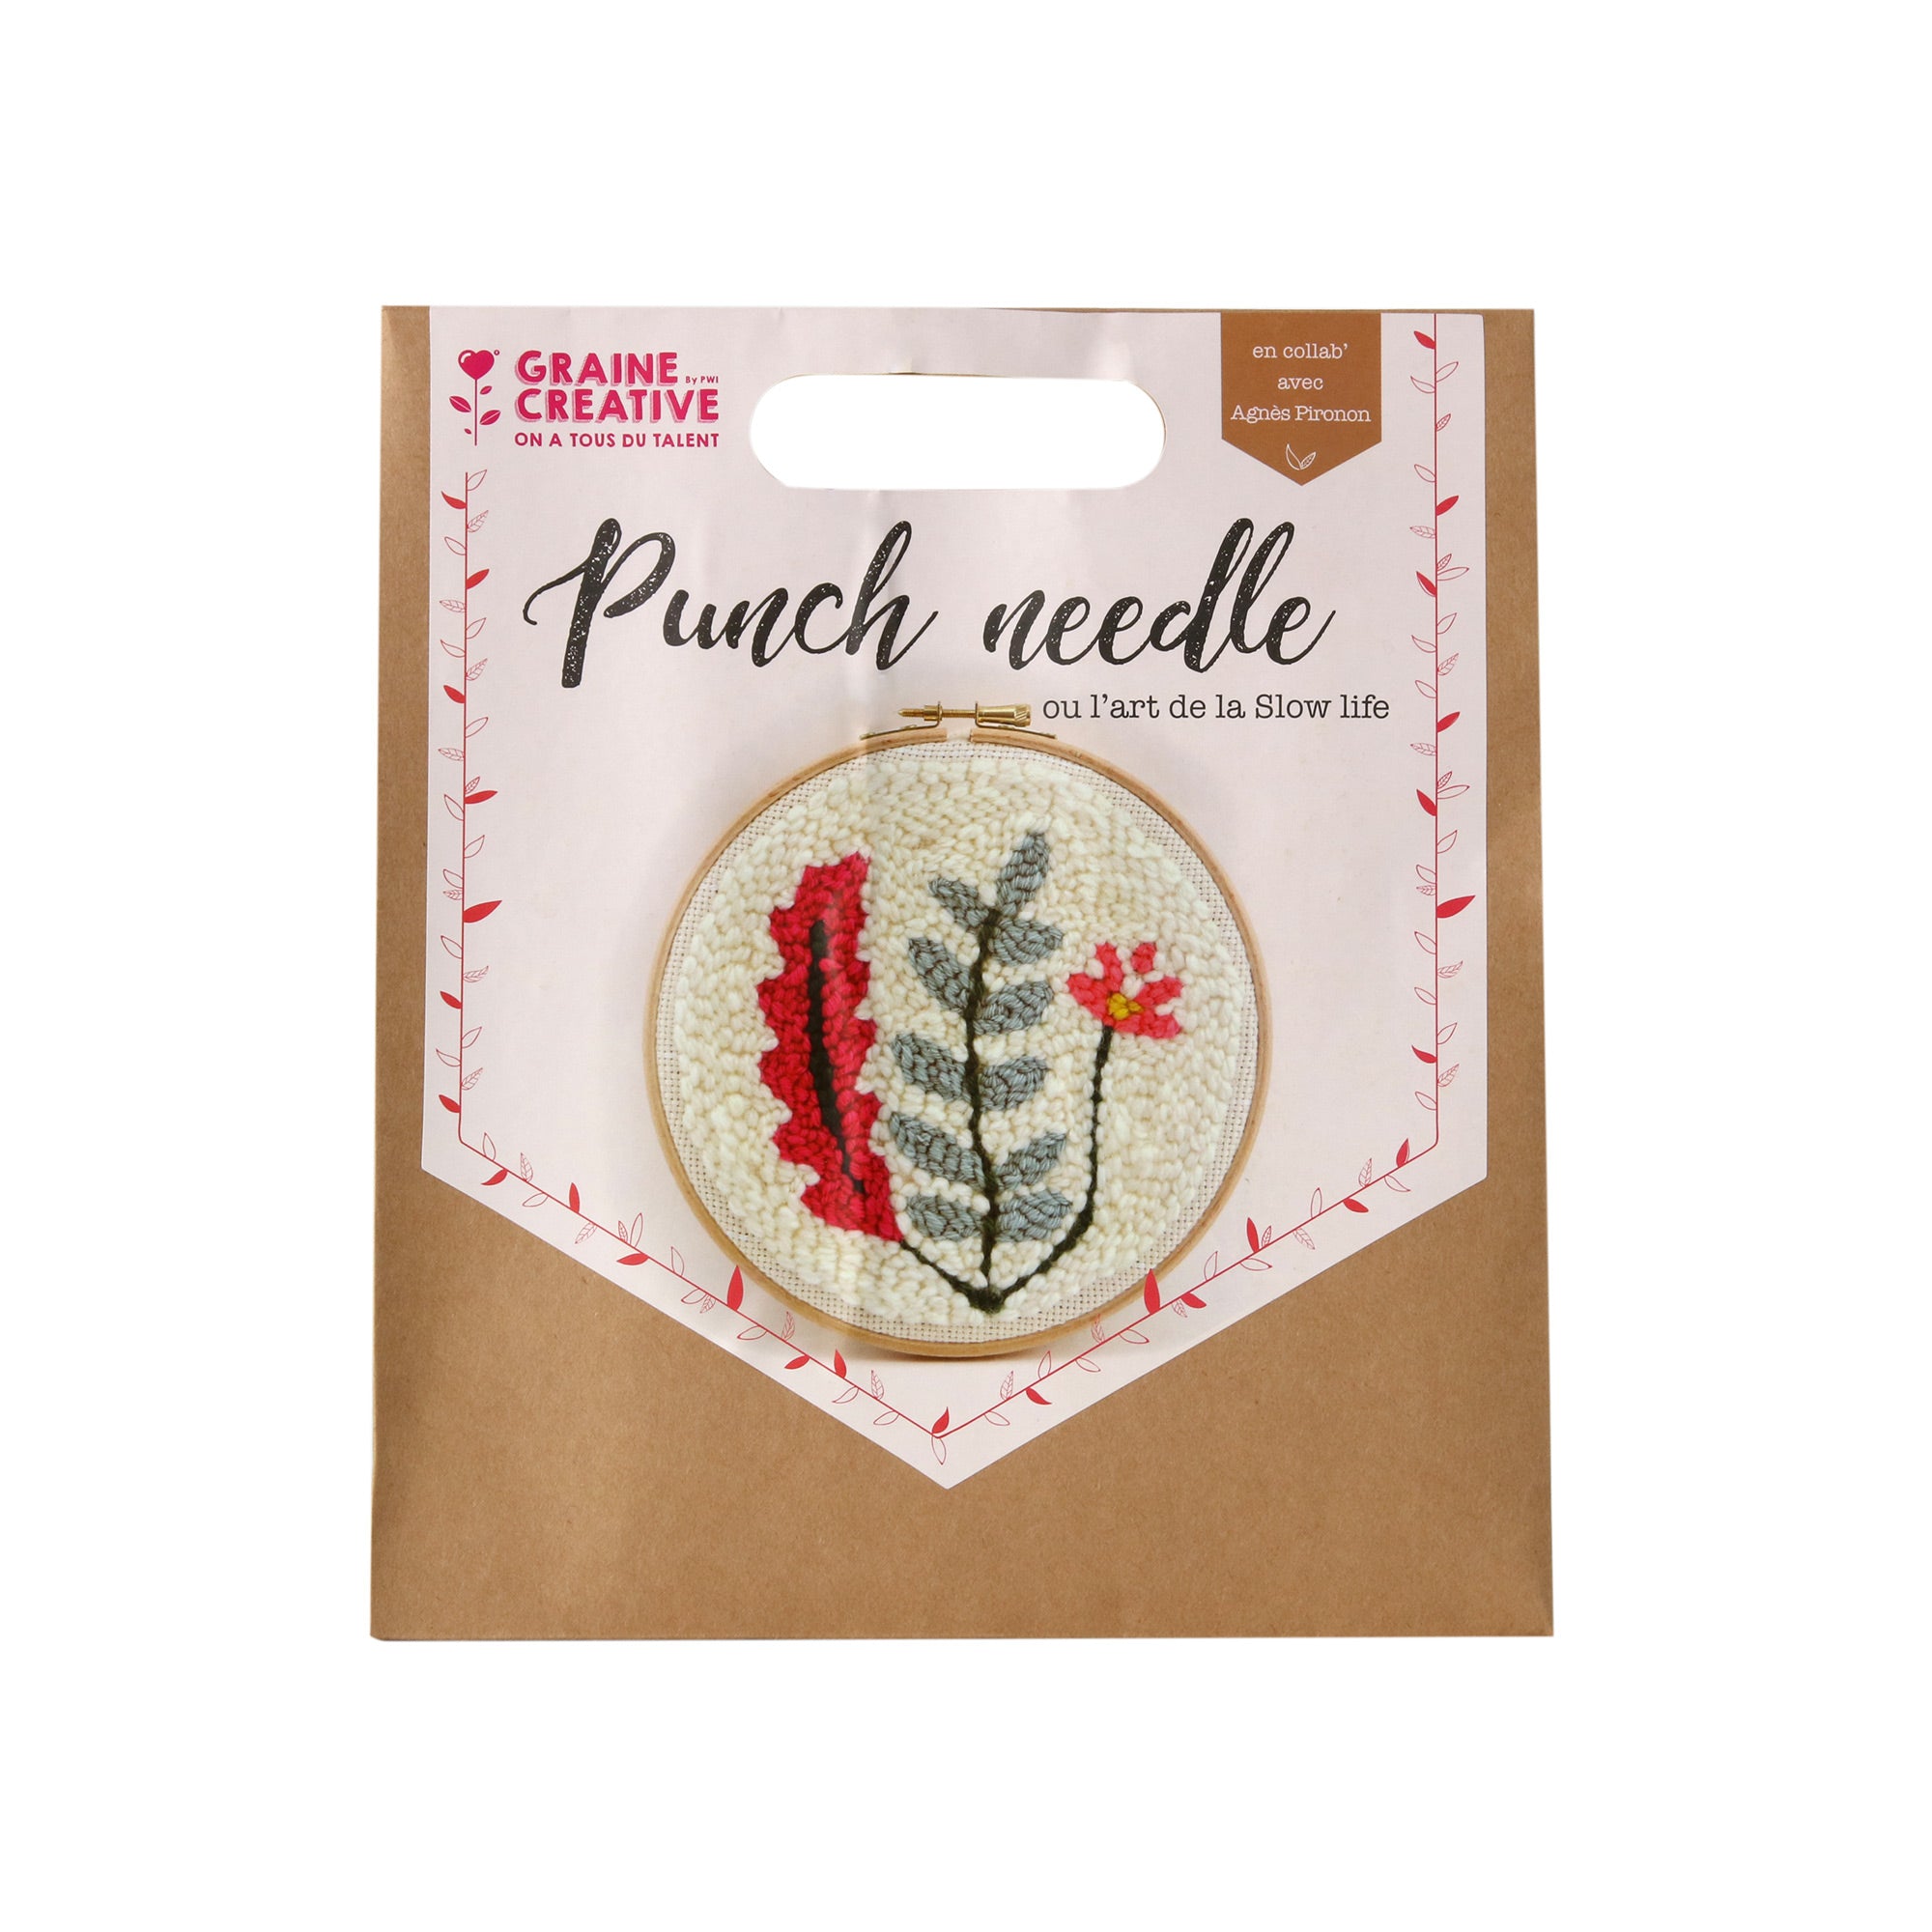 Aiguille à broder interchangeable (punch needle broderie) - Metro